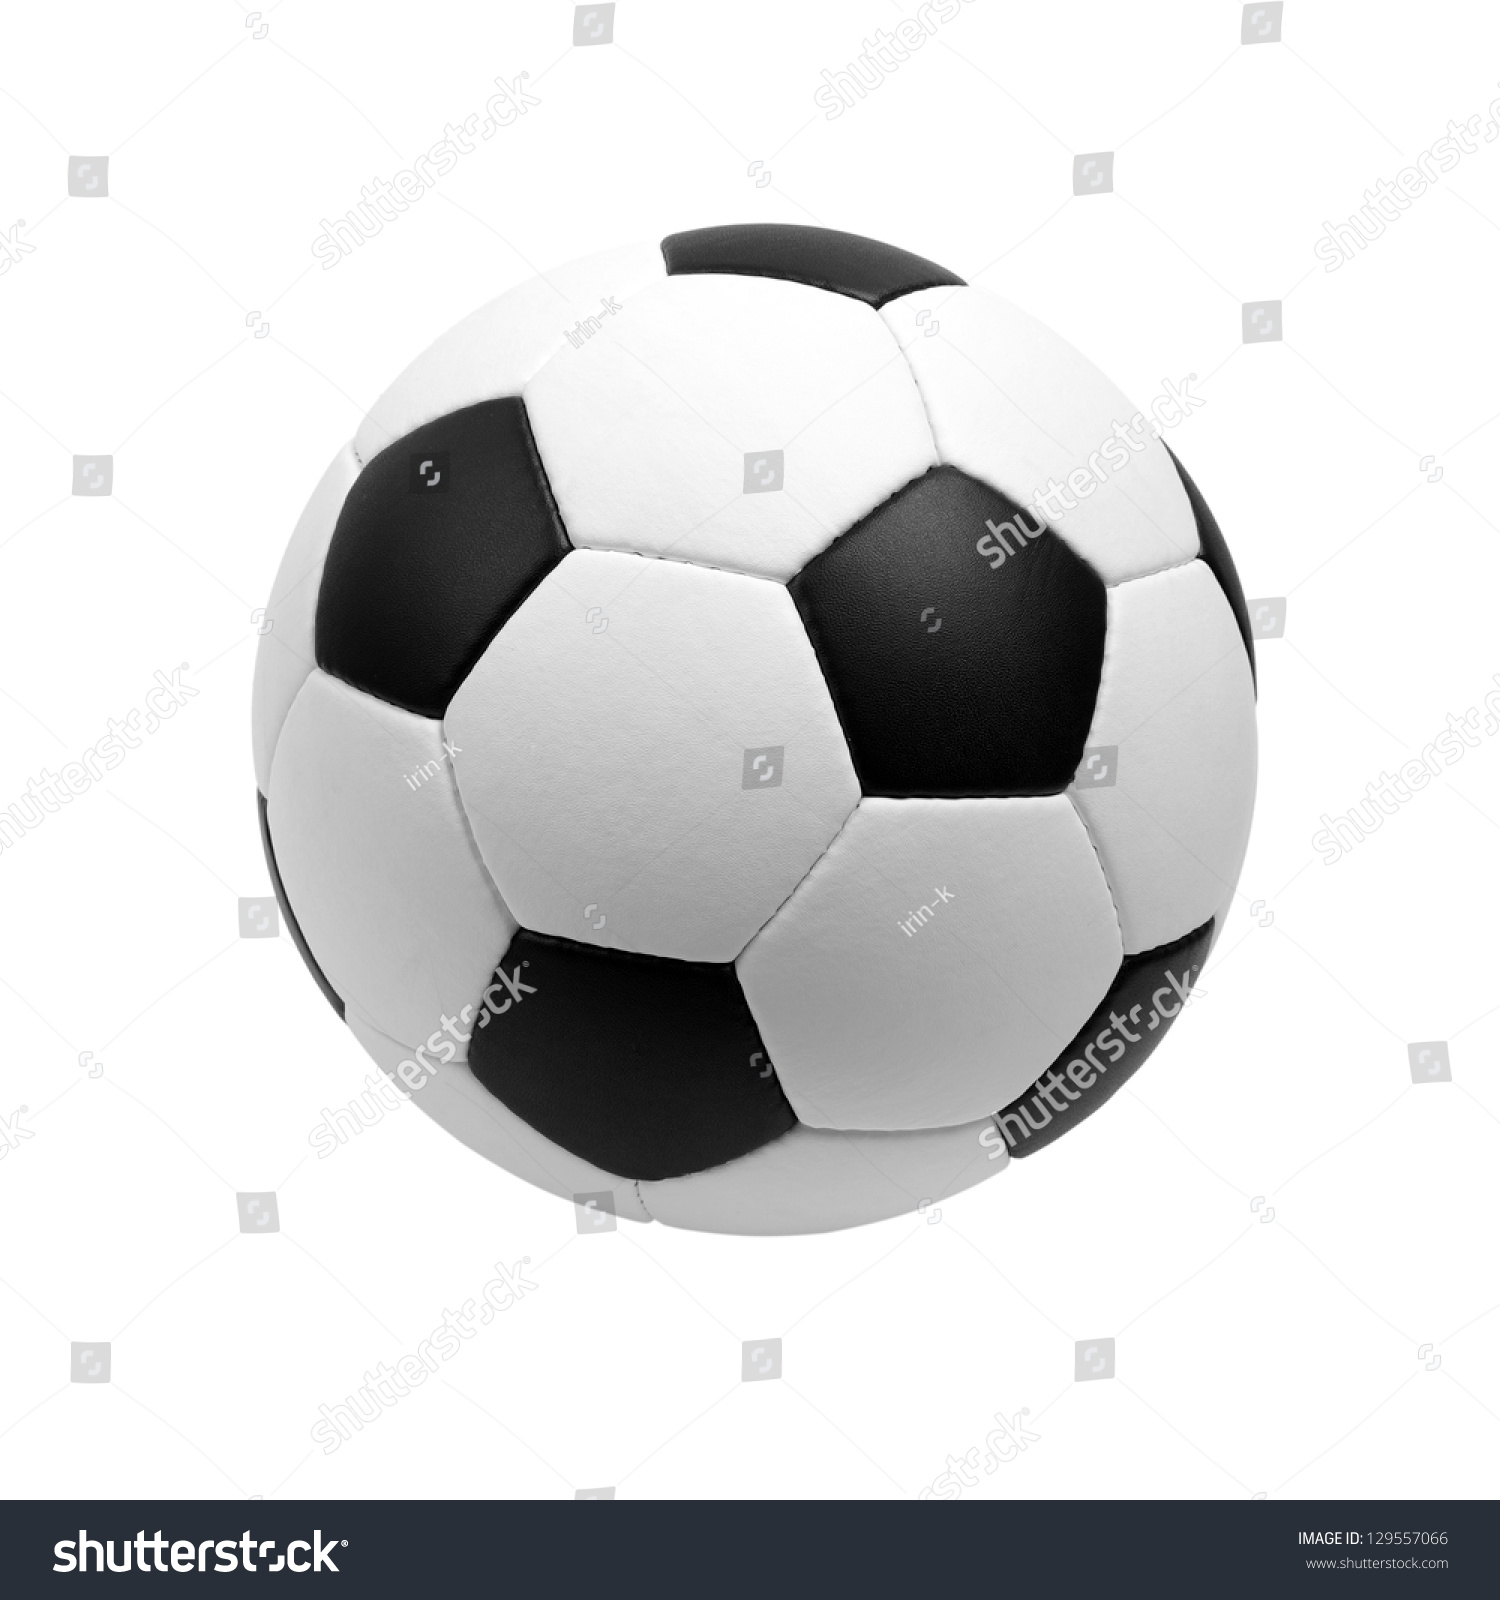 soccer ball isolated on white #129557066